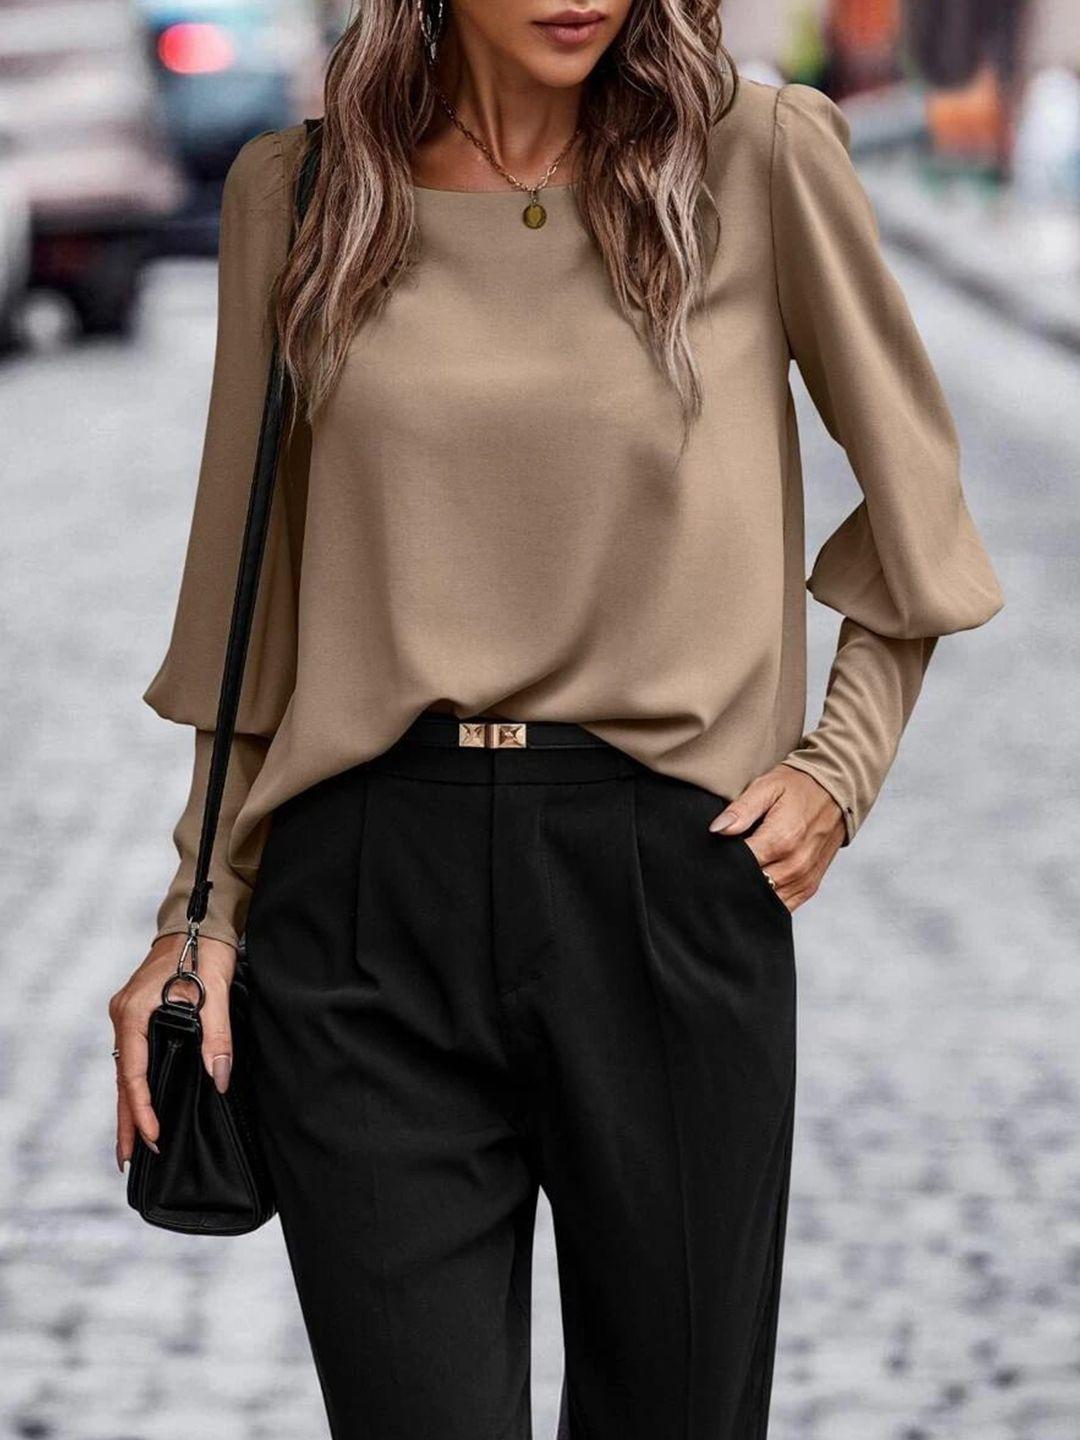 stylecast-brown-boat-neck-cuffed-sleeves-top